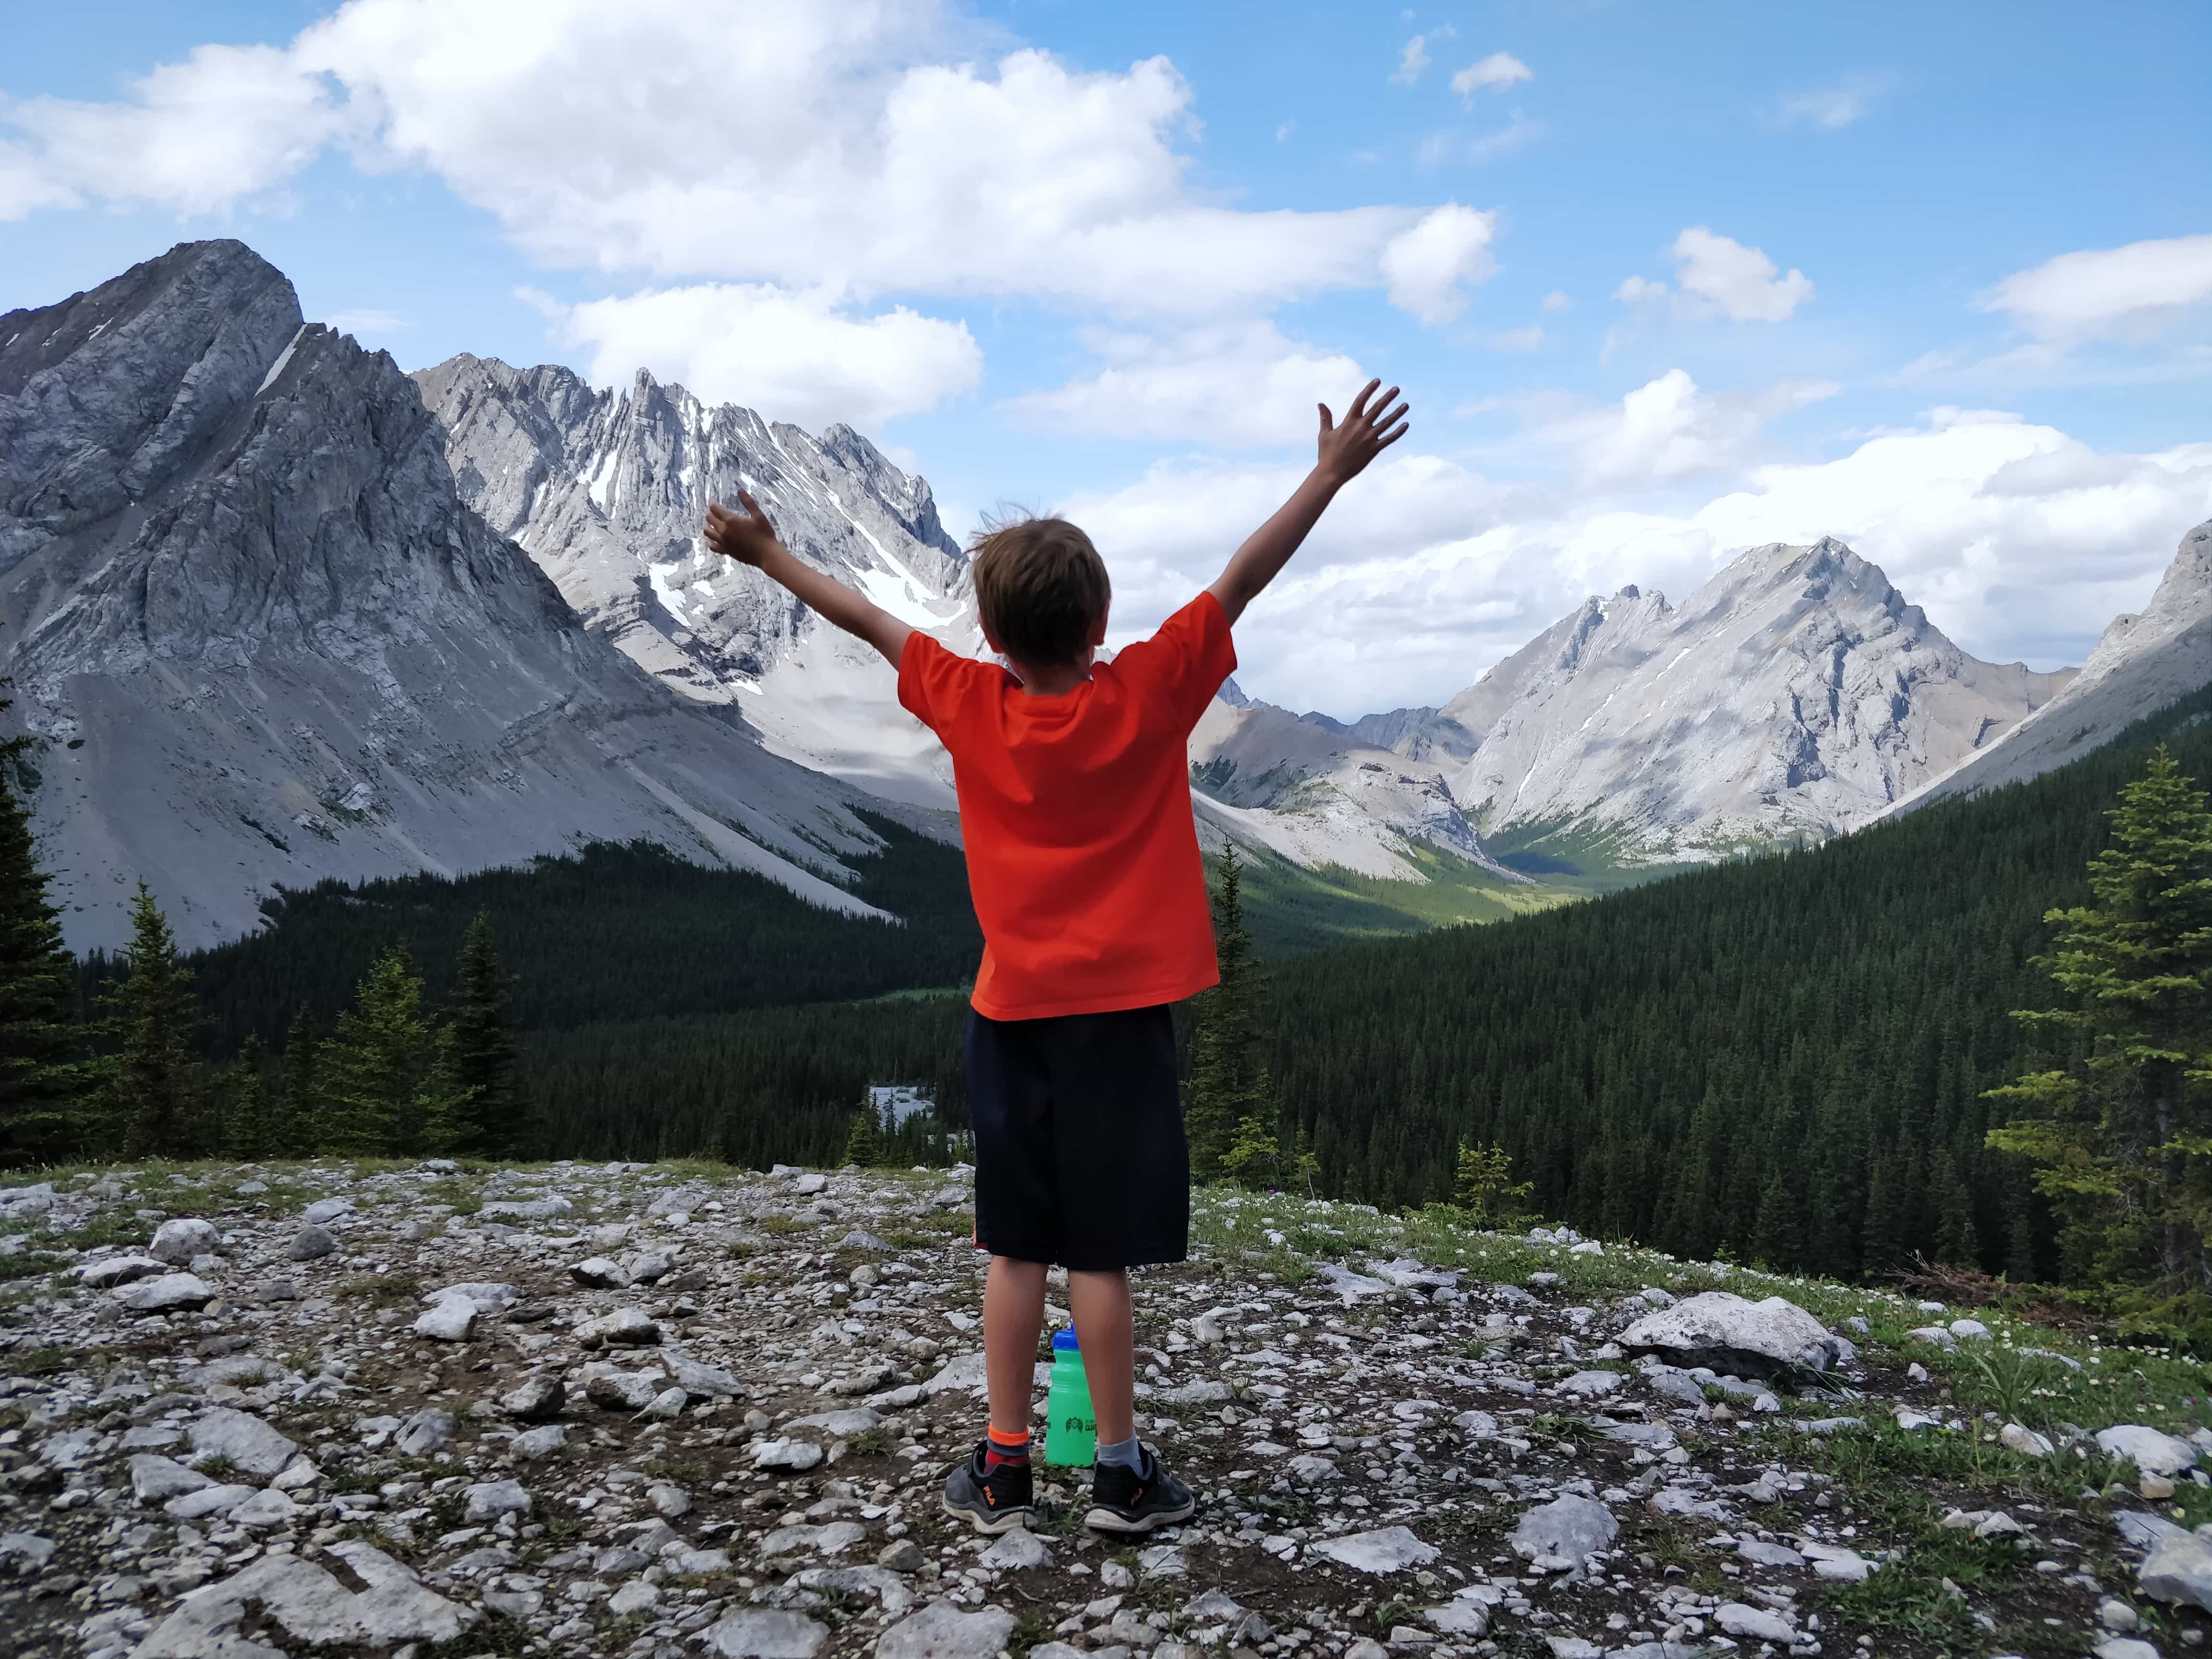 Kid raising arms in victory with mountains in the background